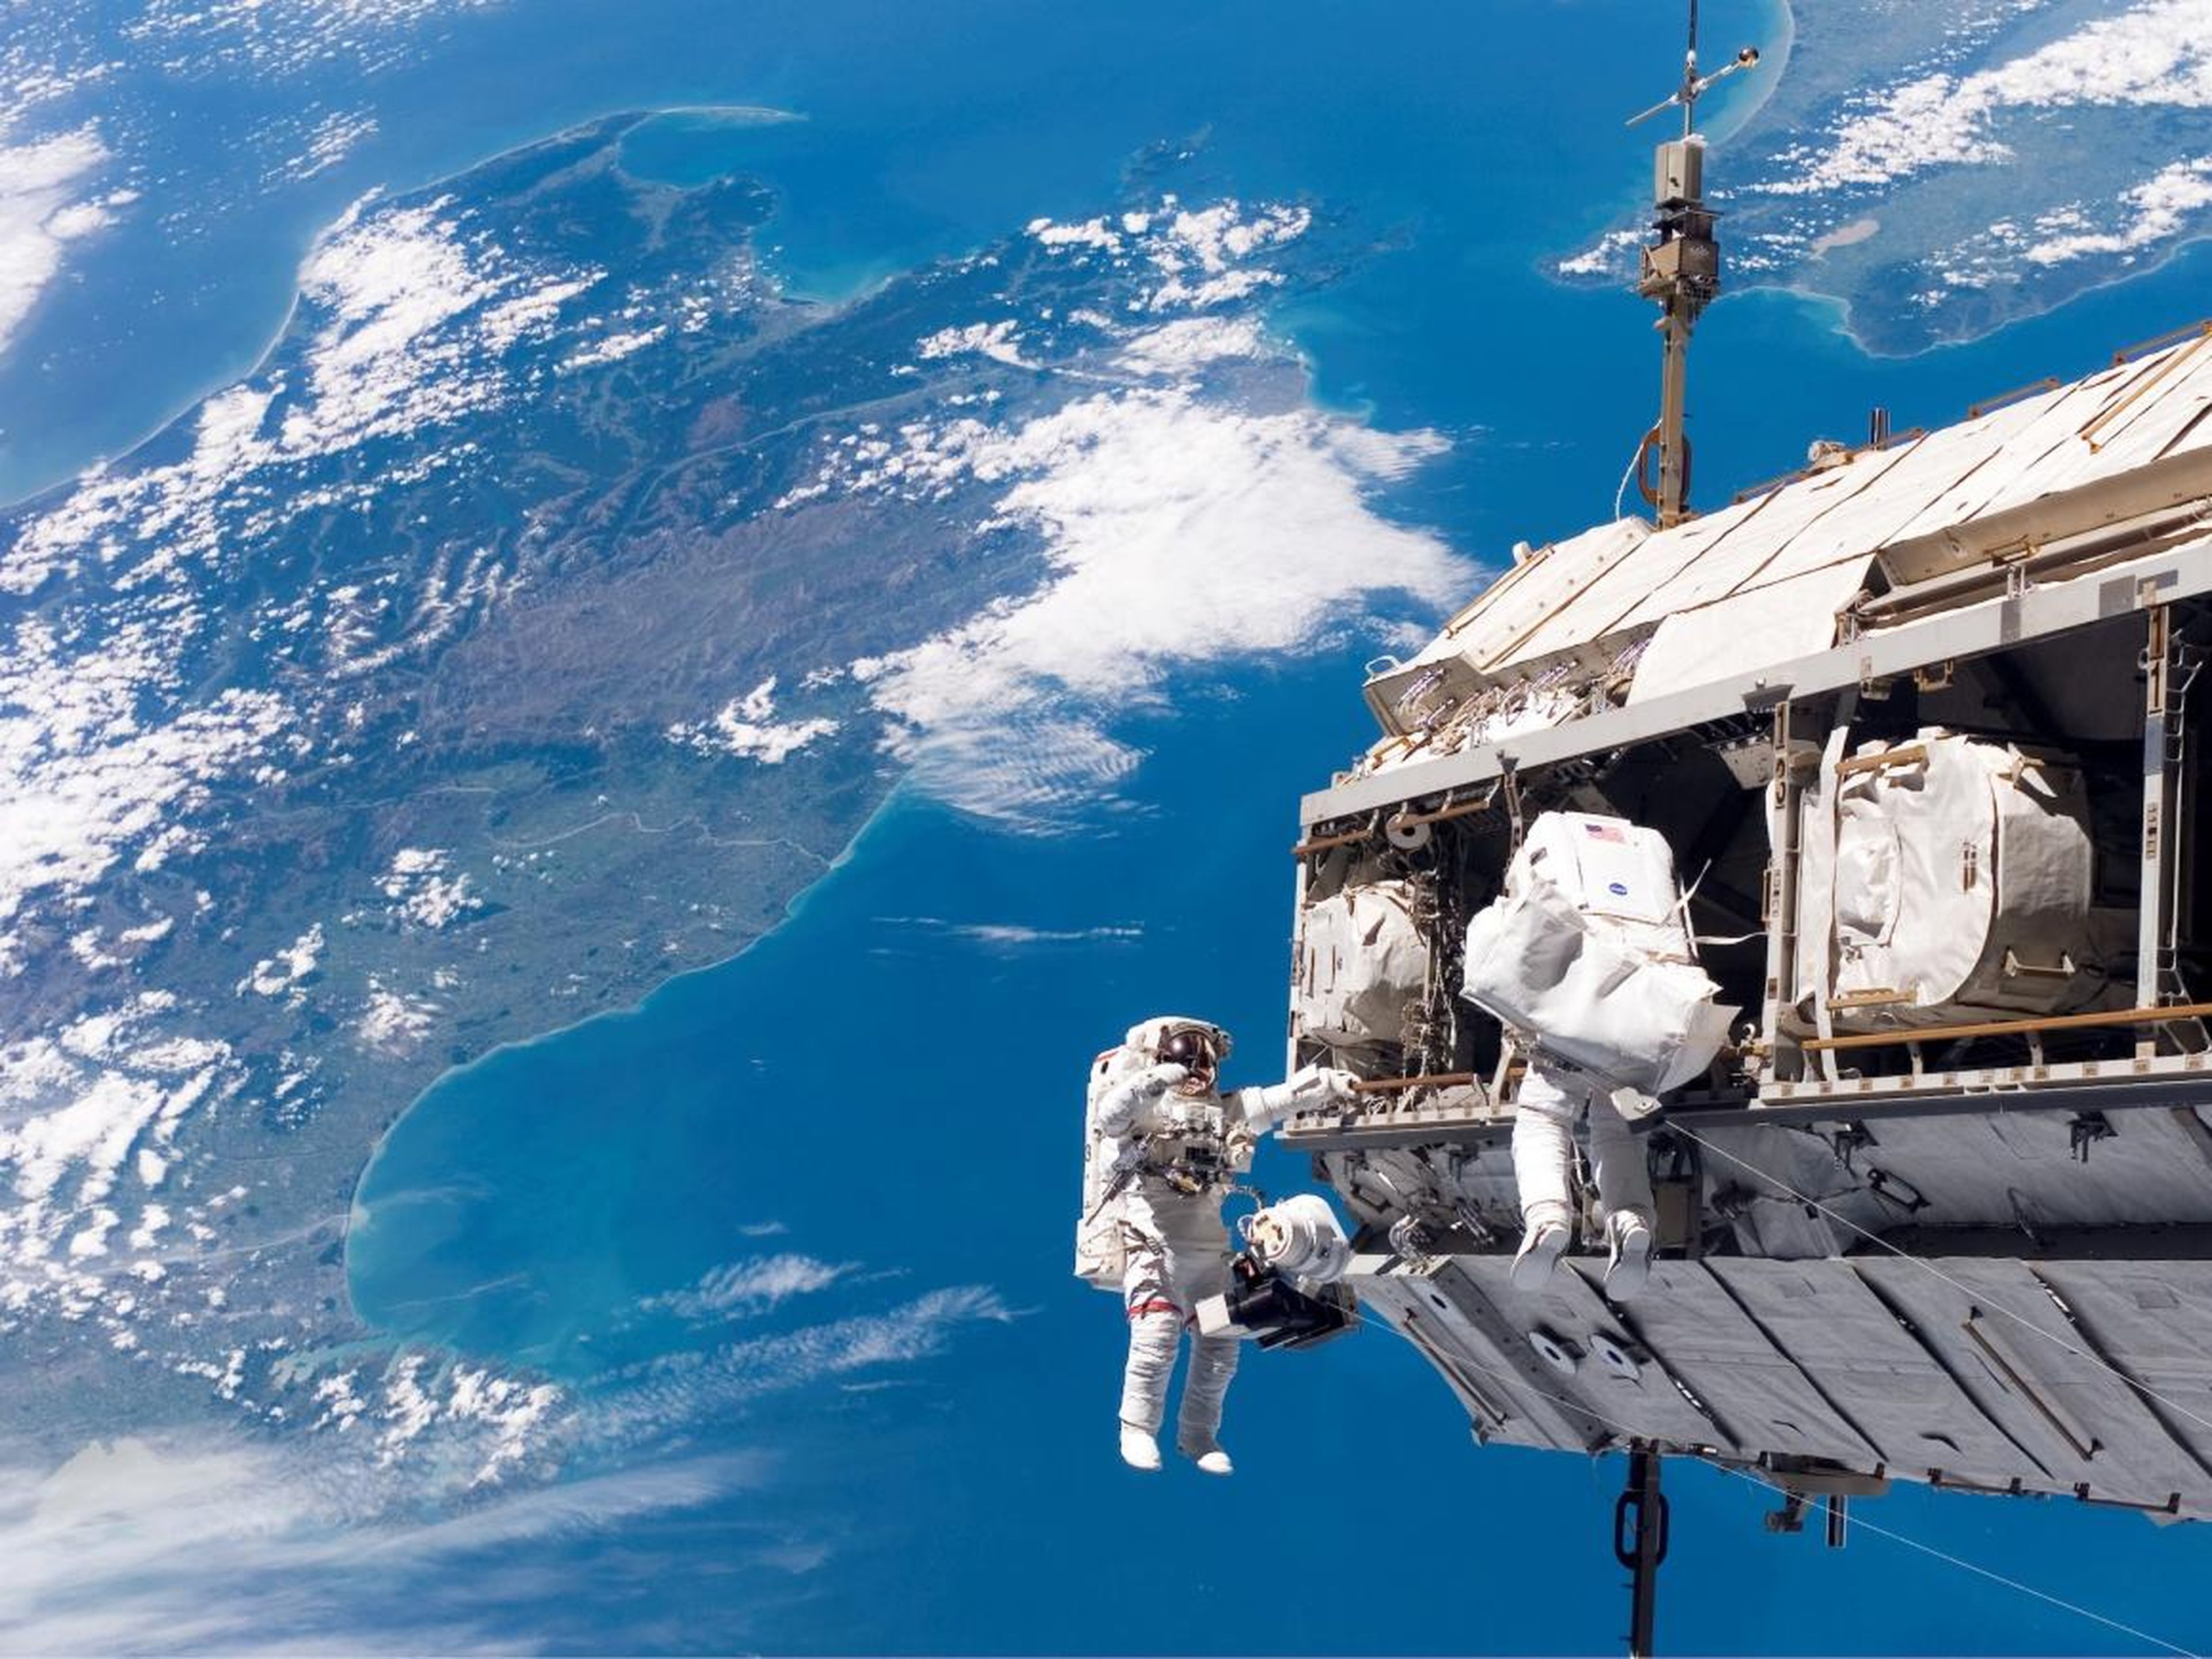 Backdropped by New Zealand and the Cook Strait in the Pacific Ocean, astronauts Robert L. Curbeam Jr. (left) and Christer Fuglesang (right) participate in an extravehicular activity (EVA).